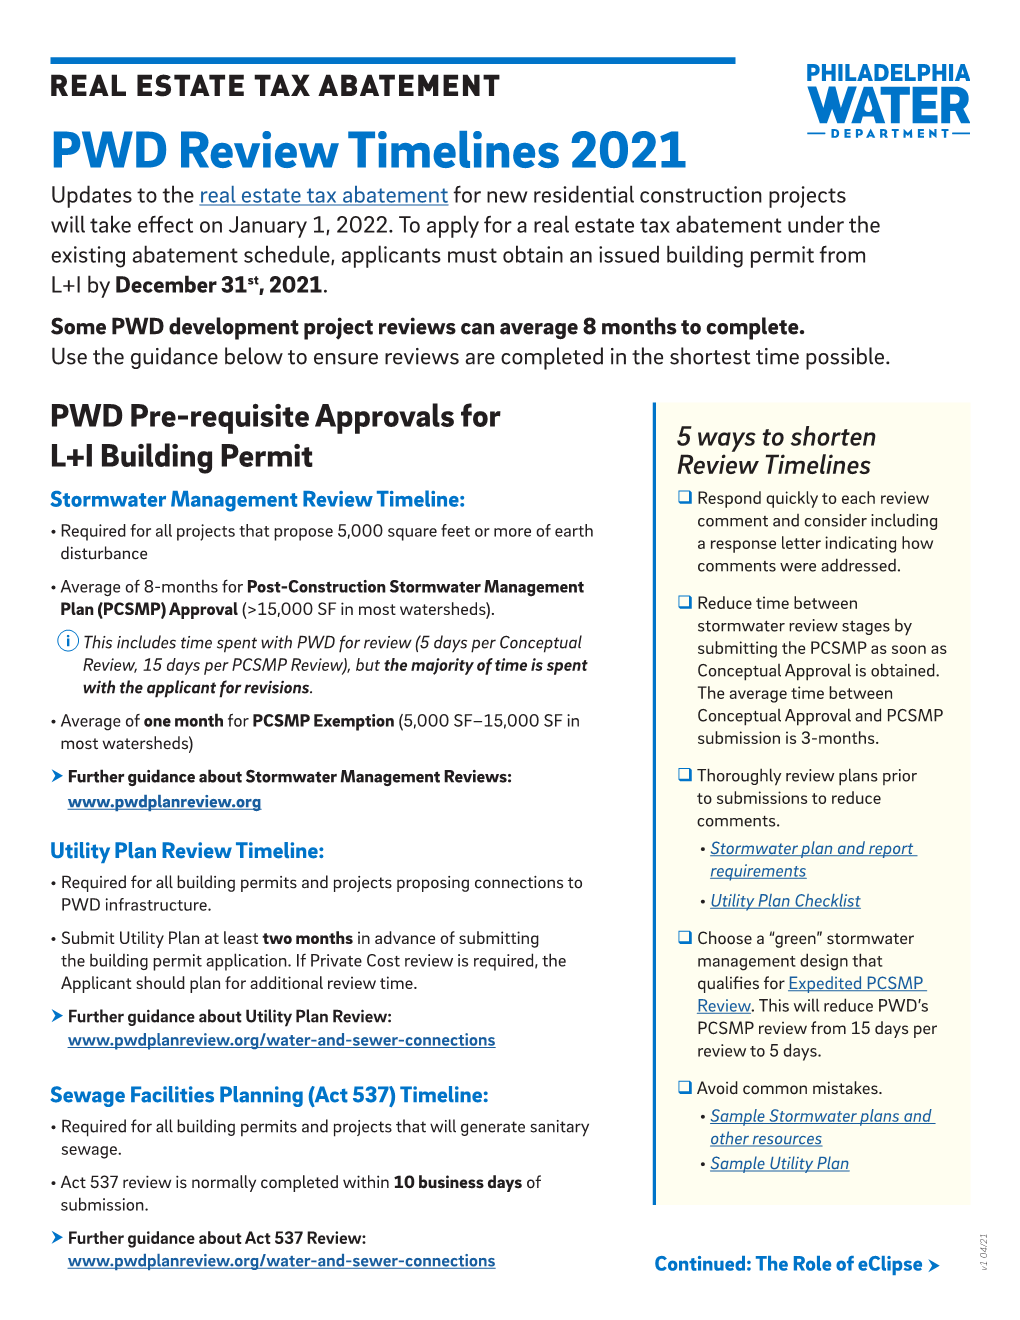 PWD Review Timelines 2021